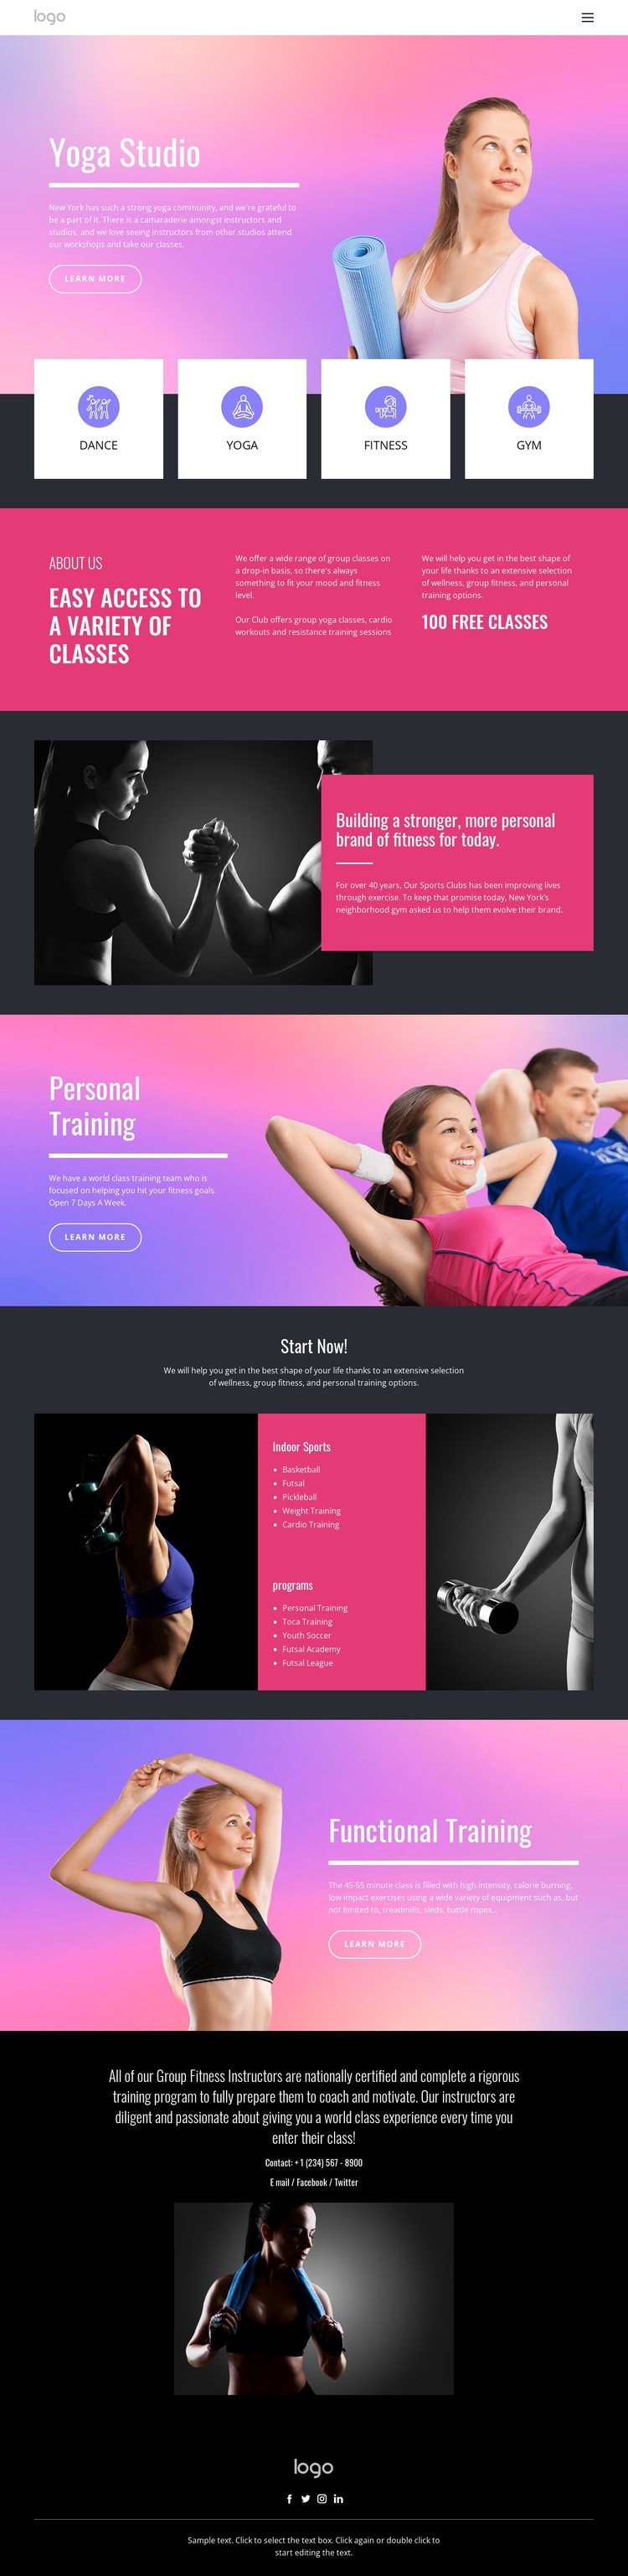 Wellness practice for self-inquiry CSS Template